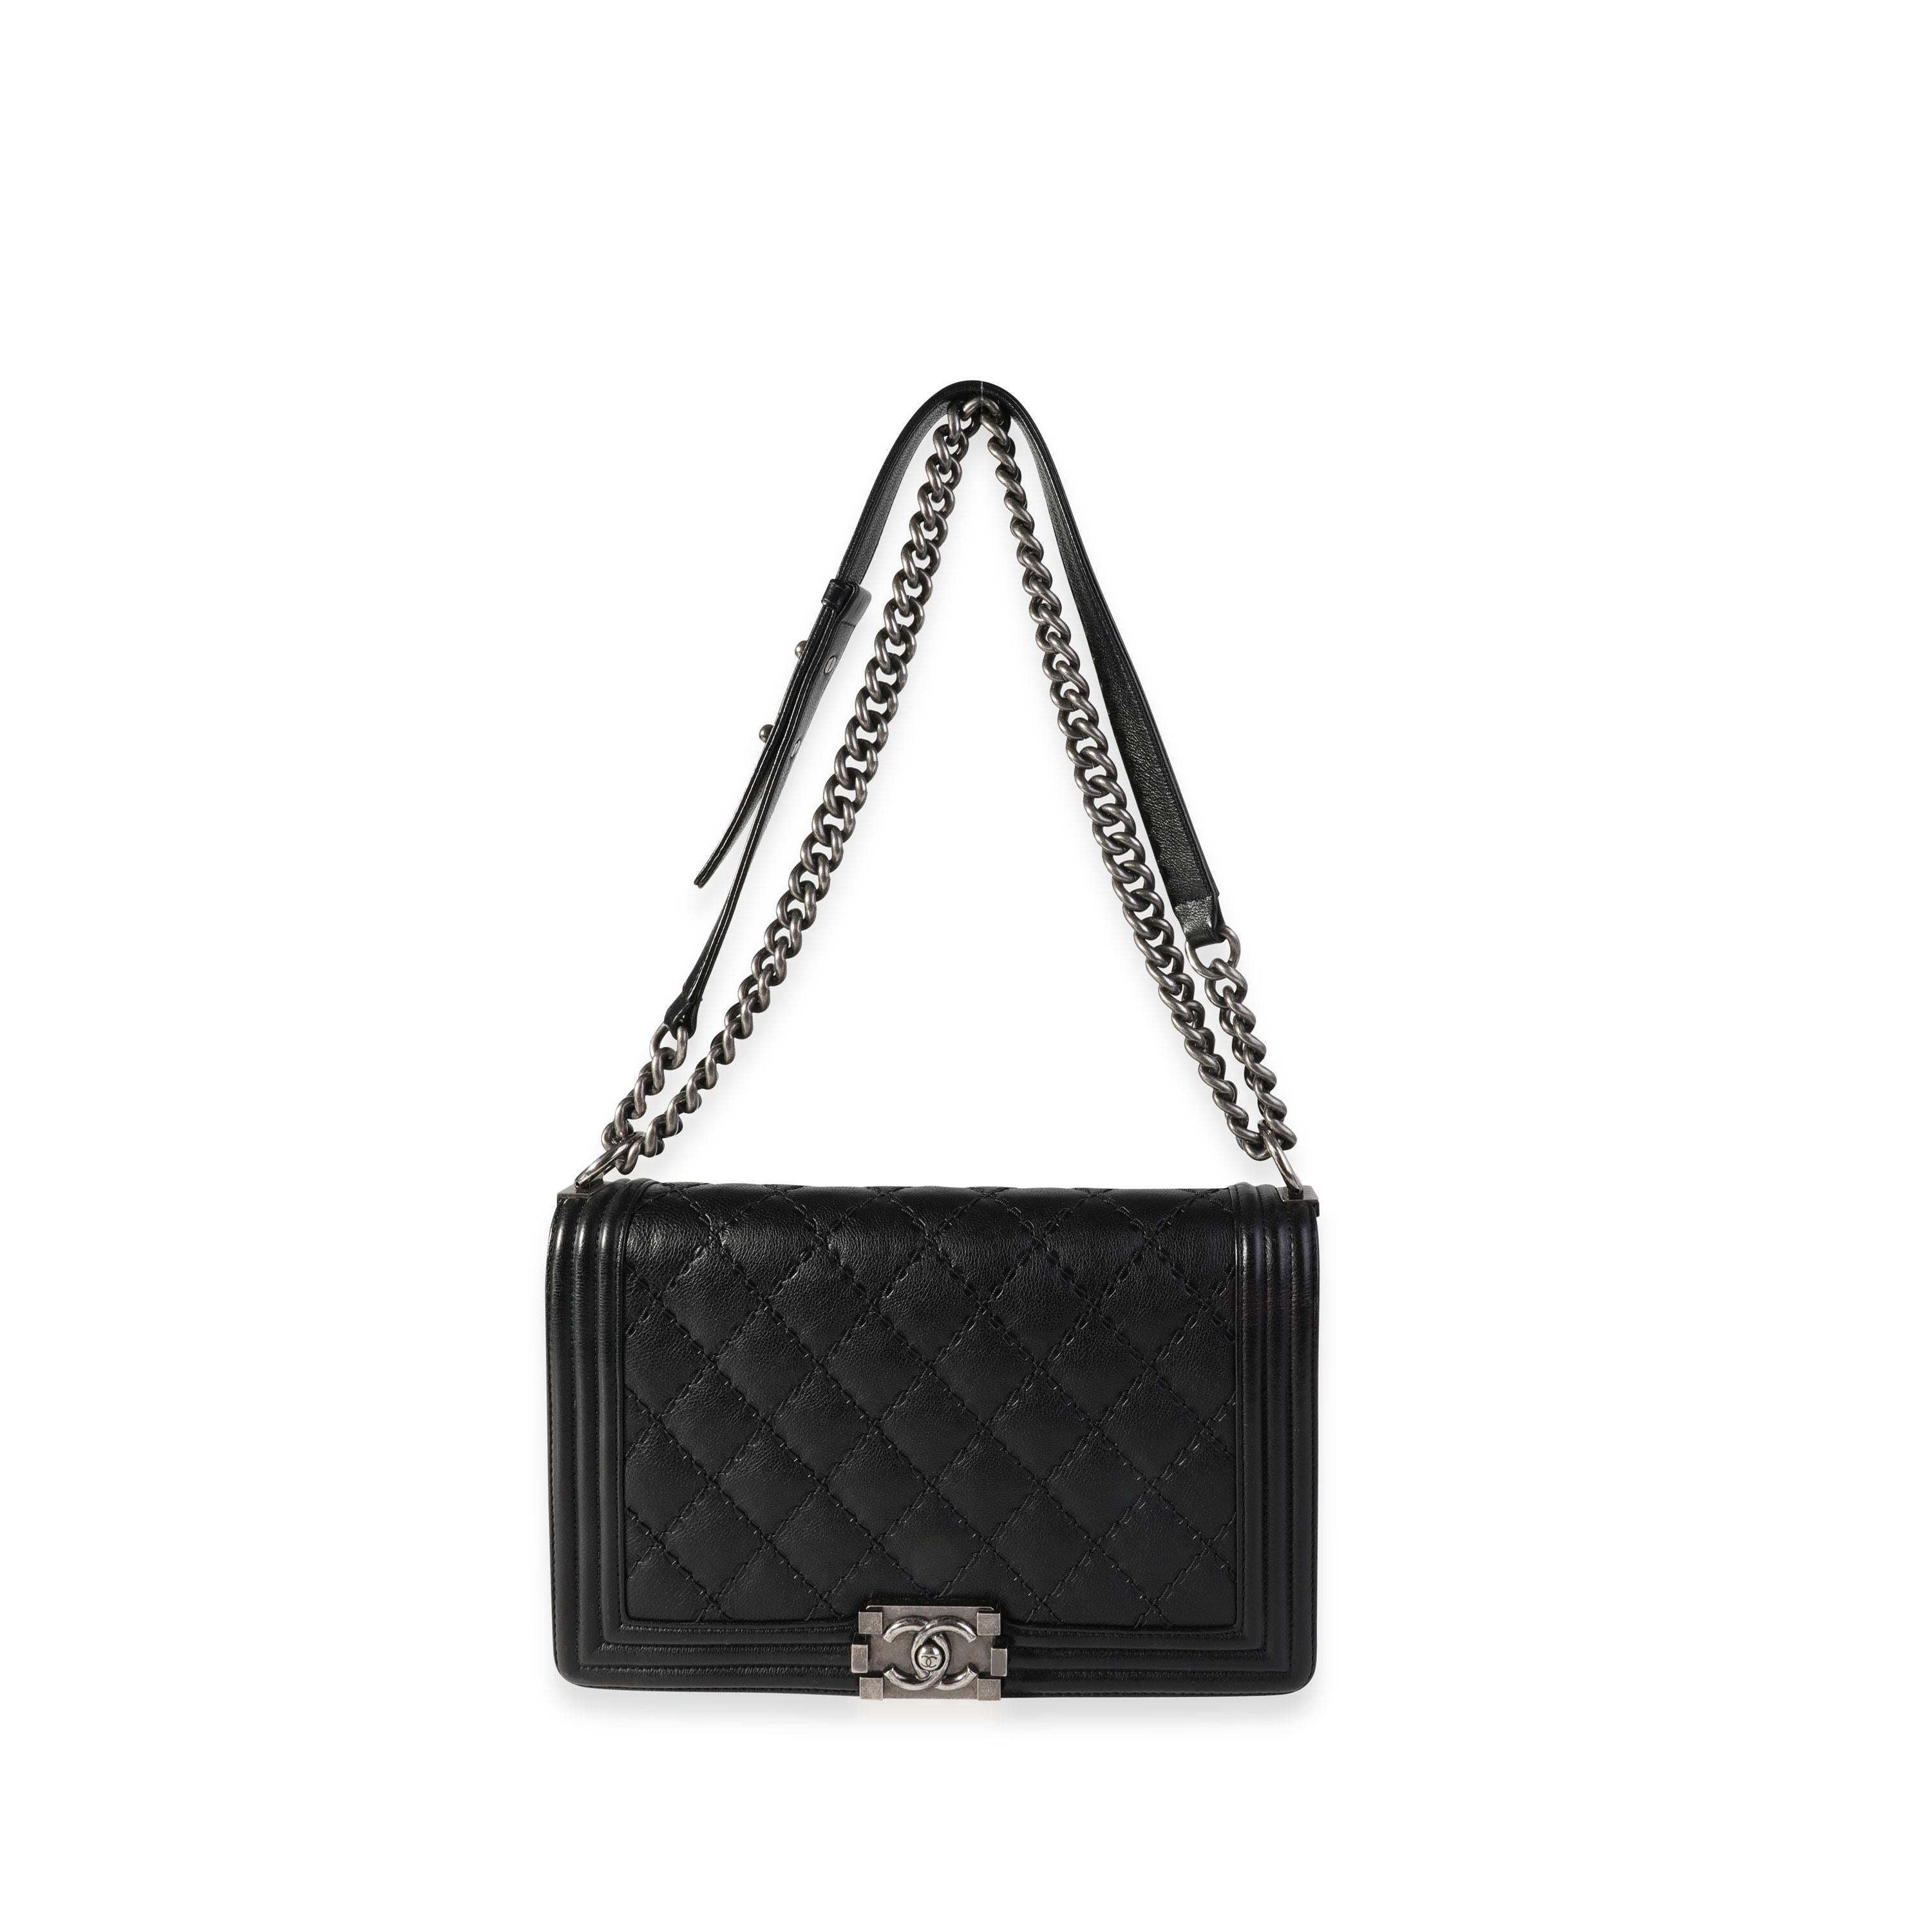 Listing Title: Chanel Black Quilted Whipstitch Calfskin New Medium Boy Bag
SKU: 118569
Condition: Pre-owned (3000)
Handbag Condition: Very Good
Condition Comments: Very Good Condition. Scuffing to corners and interior leather. Marks on interior